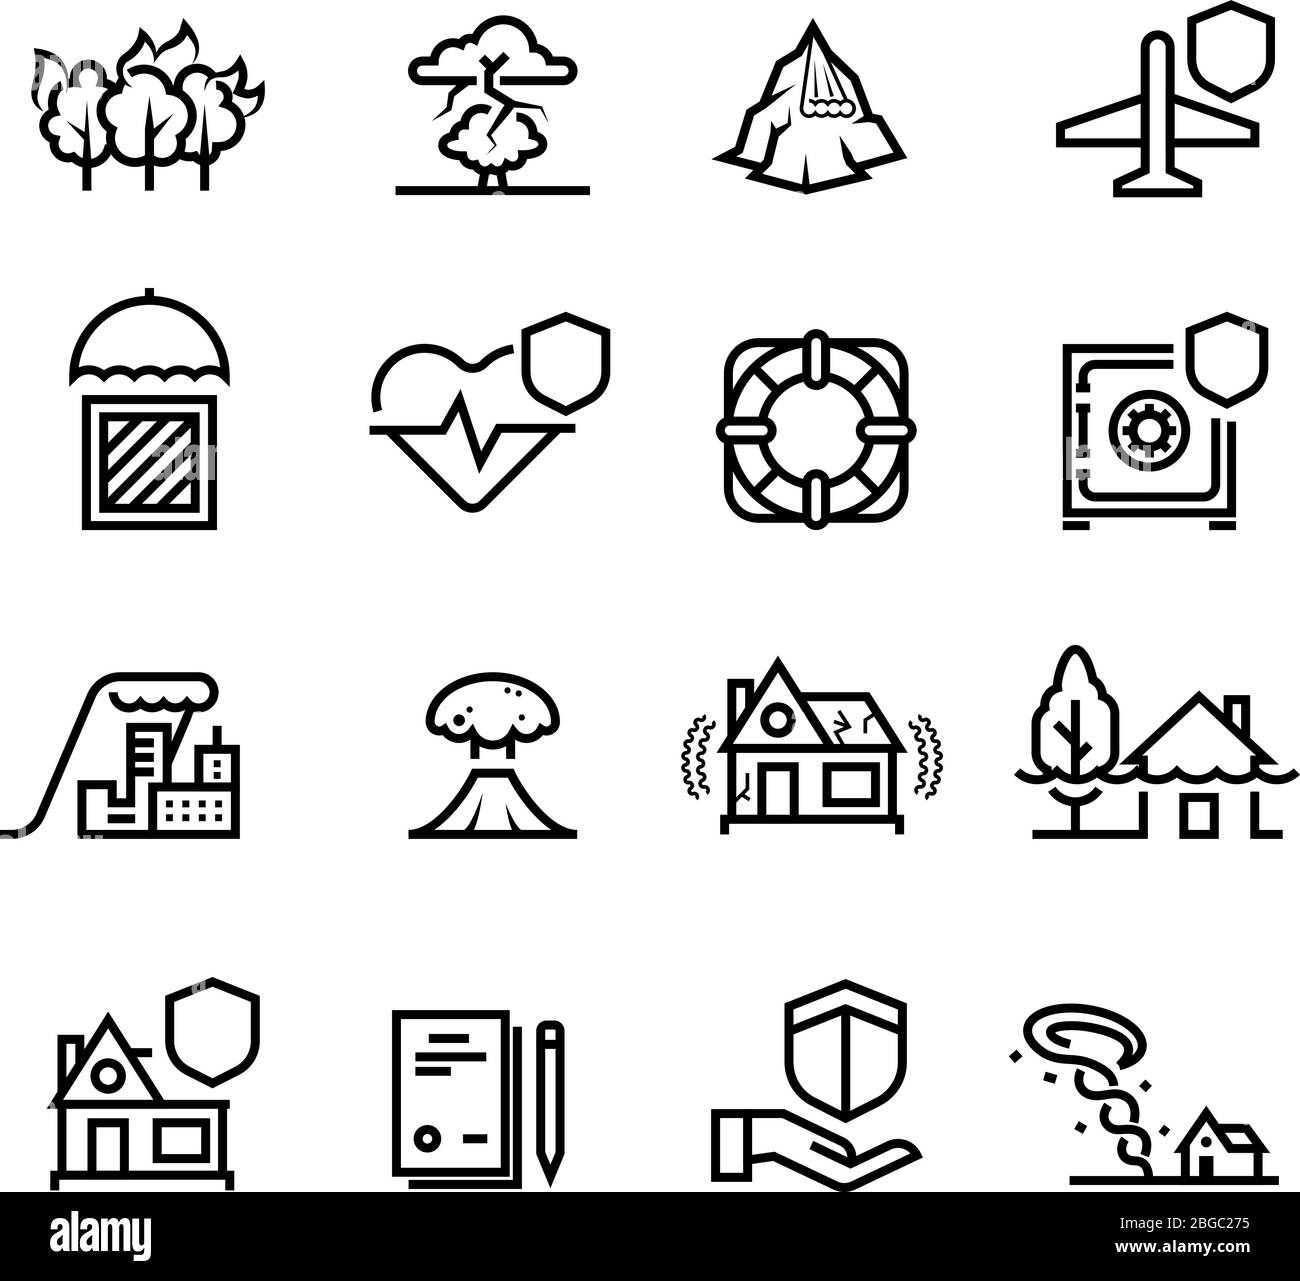 Insurance cases and natural disasters line icons. Property, life and health safety outline symbols. Insurance and protection health and house. Vector illustration Stock Vector